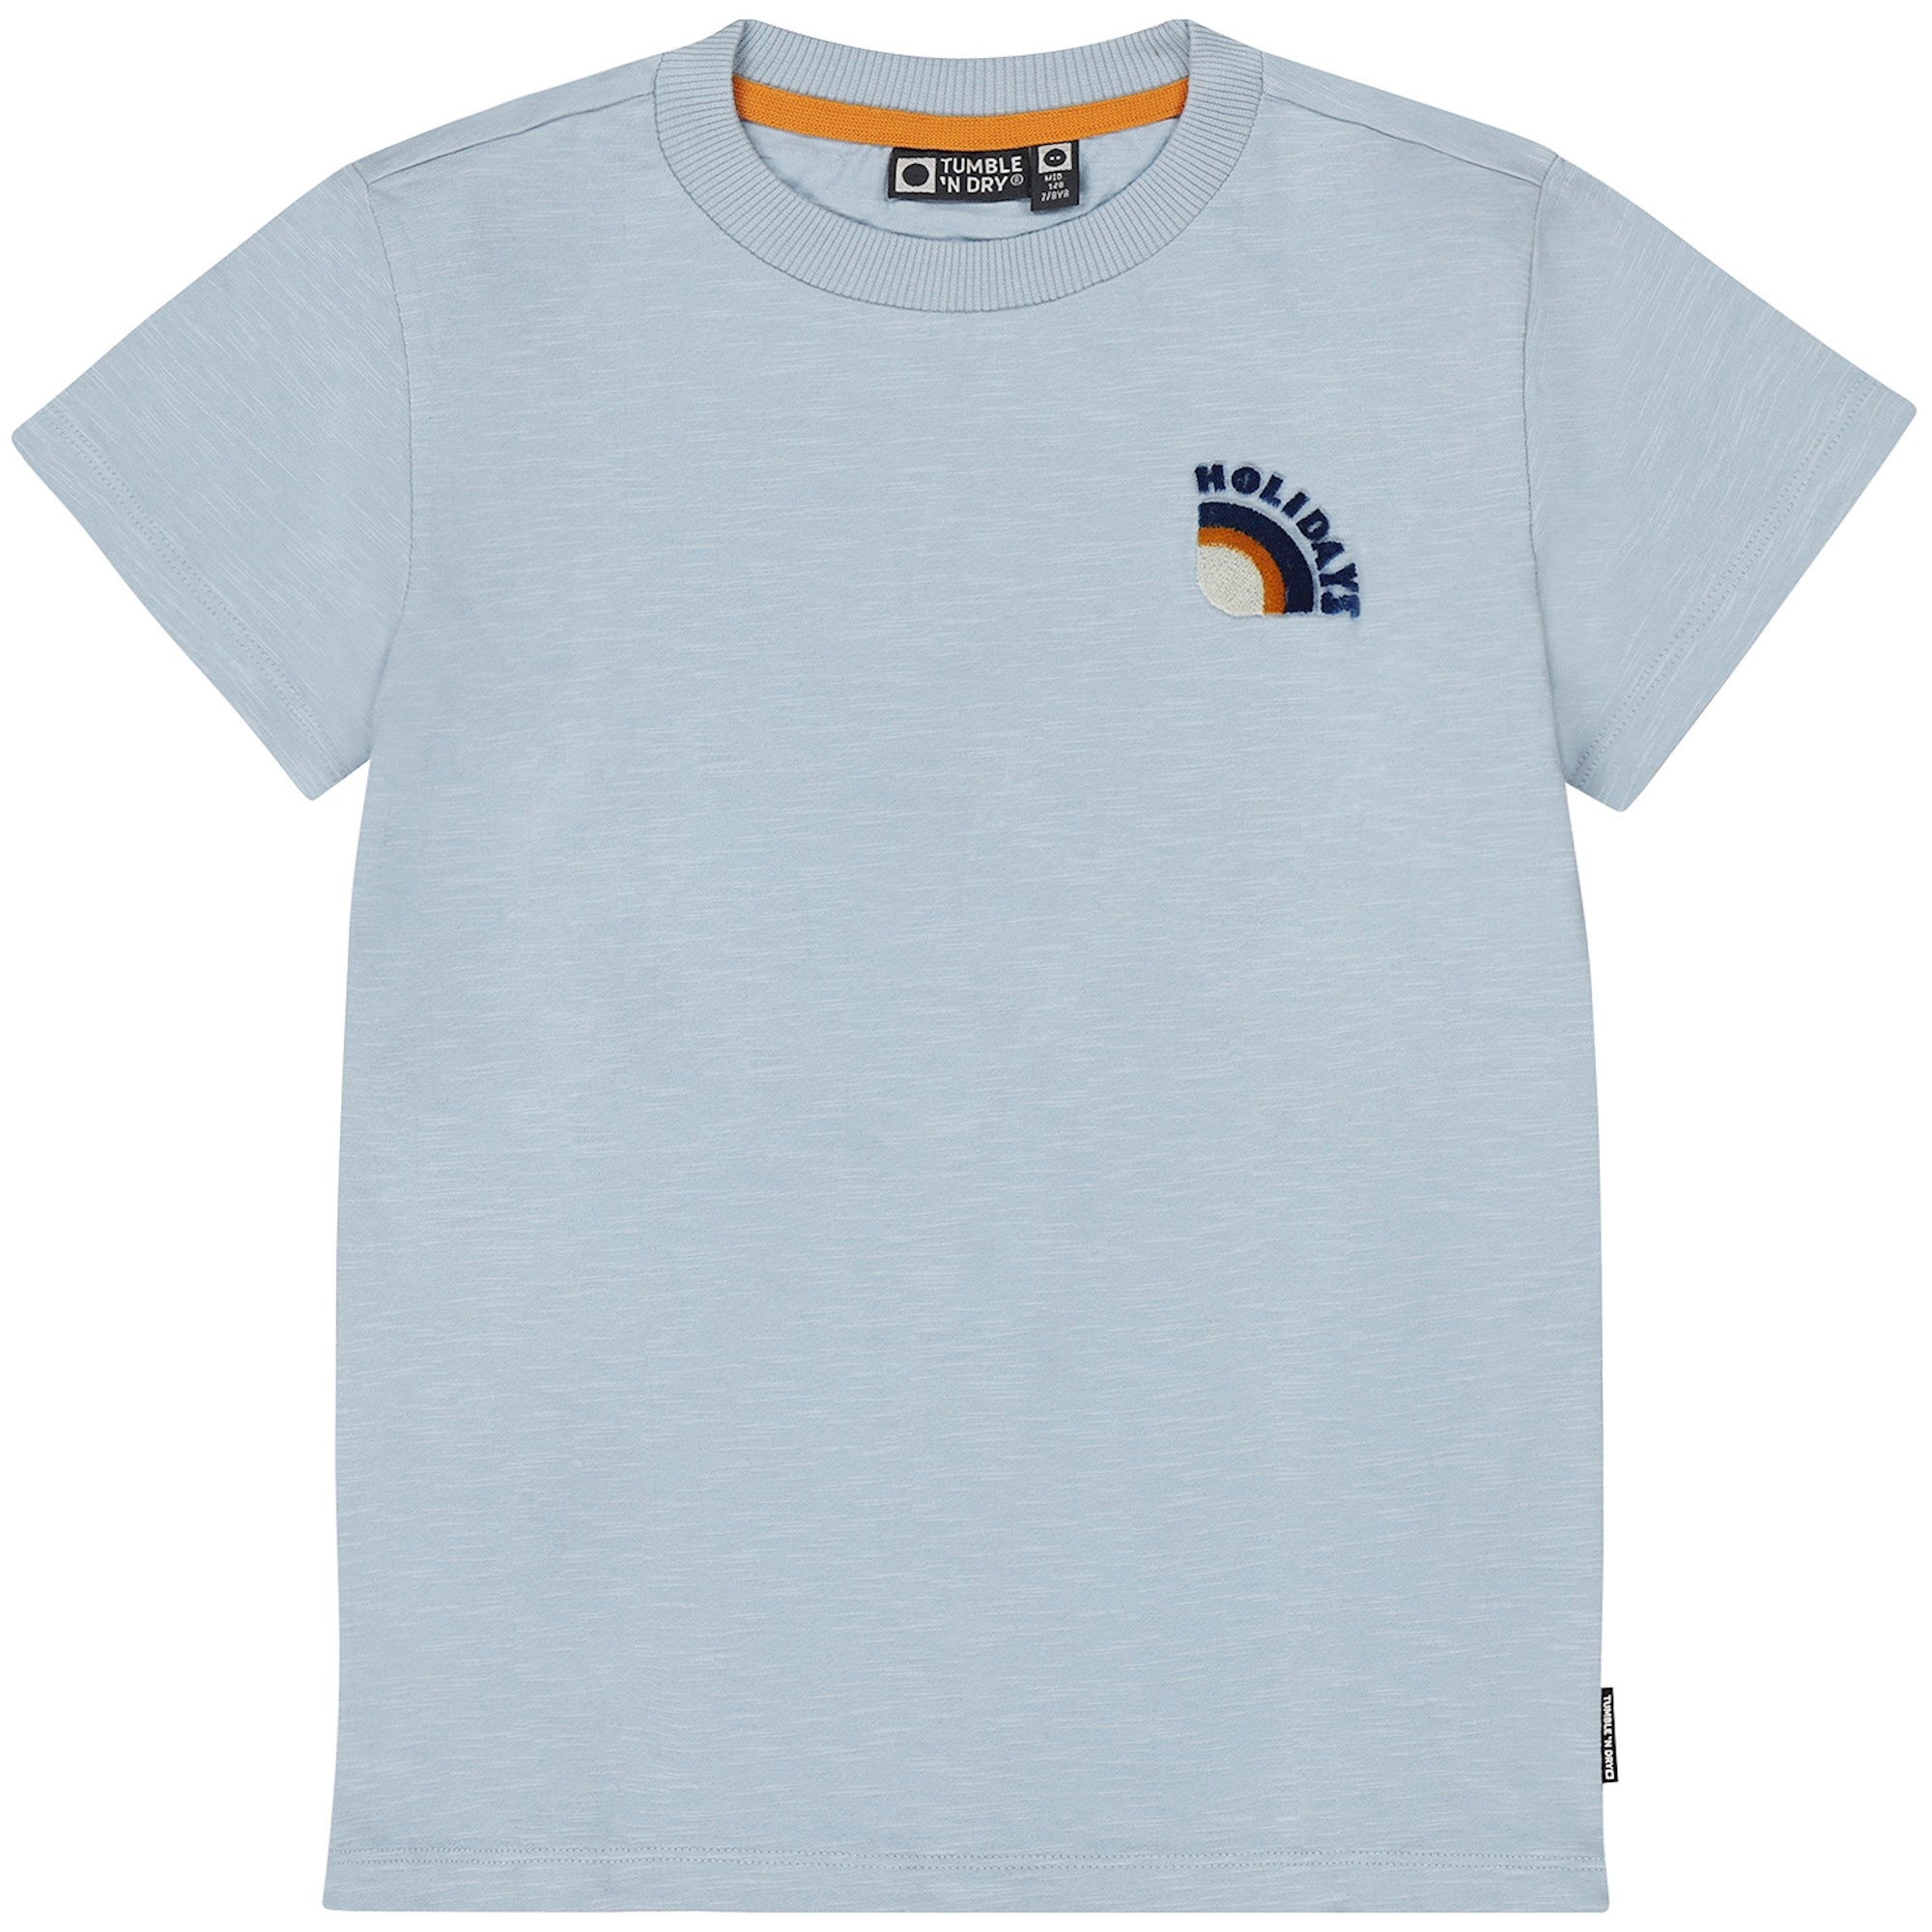 Tumble 'N Dry-collectie T-shirt Lucca (dusty blue)